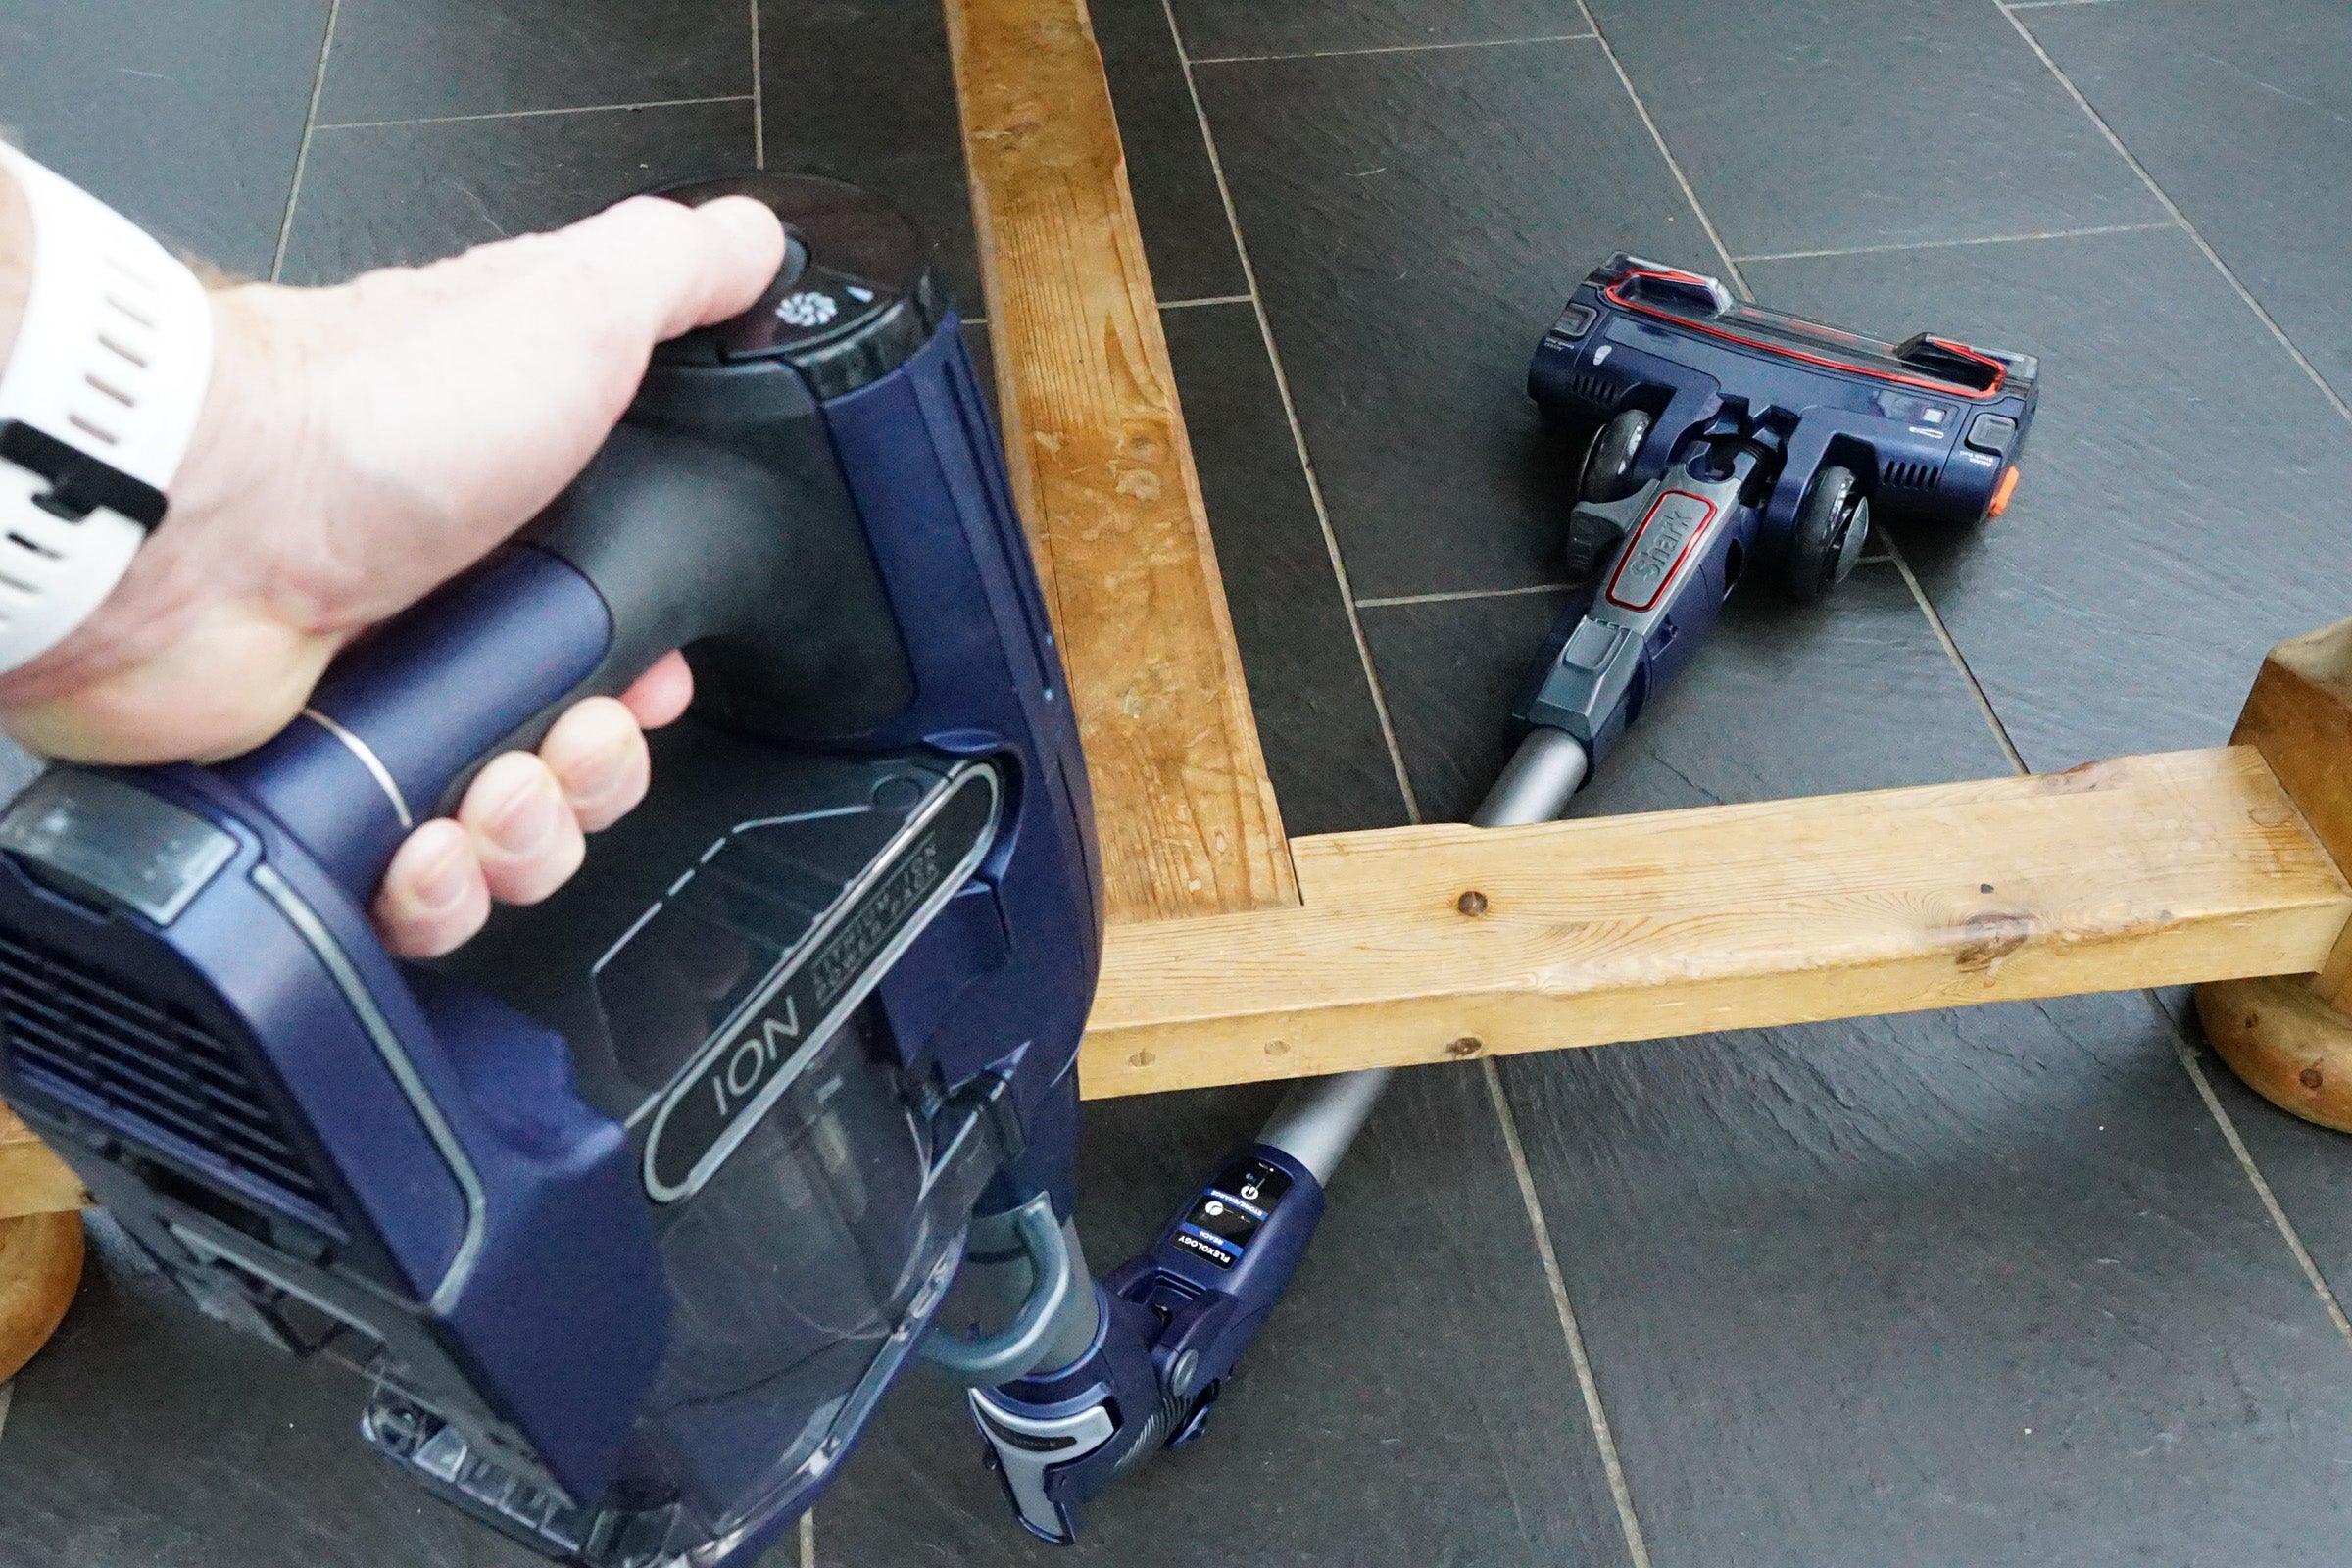 Hand holding a Shark DuoClean Cordless vacuum part with main unit in background.